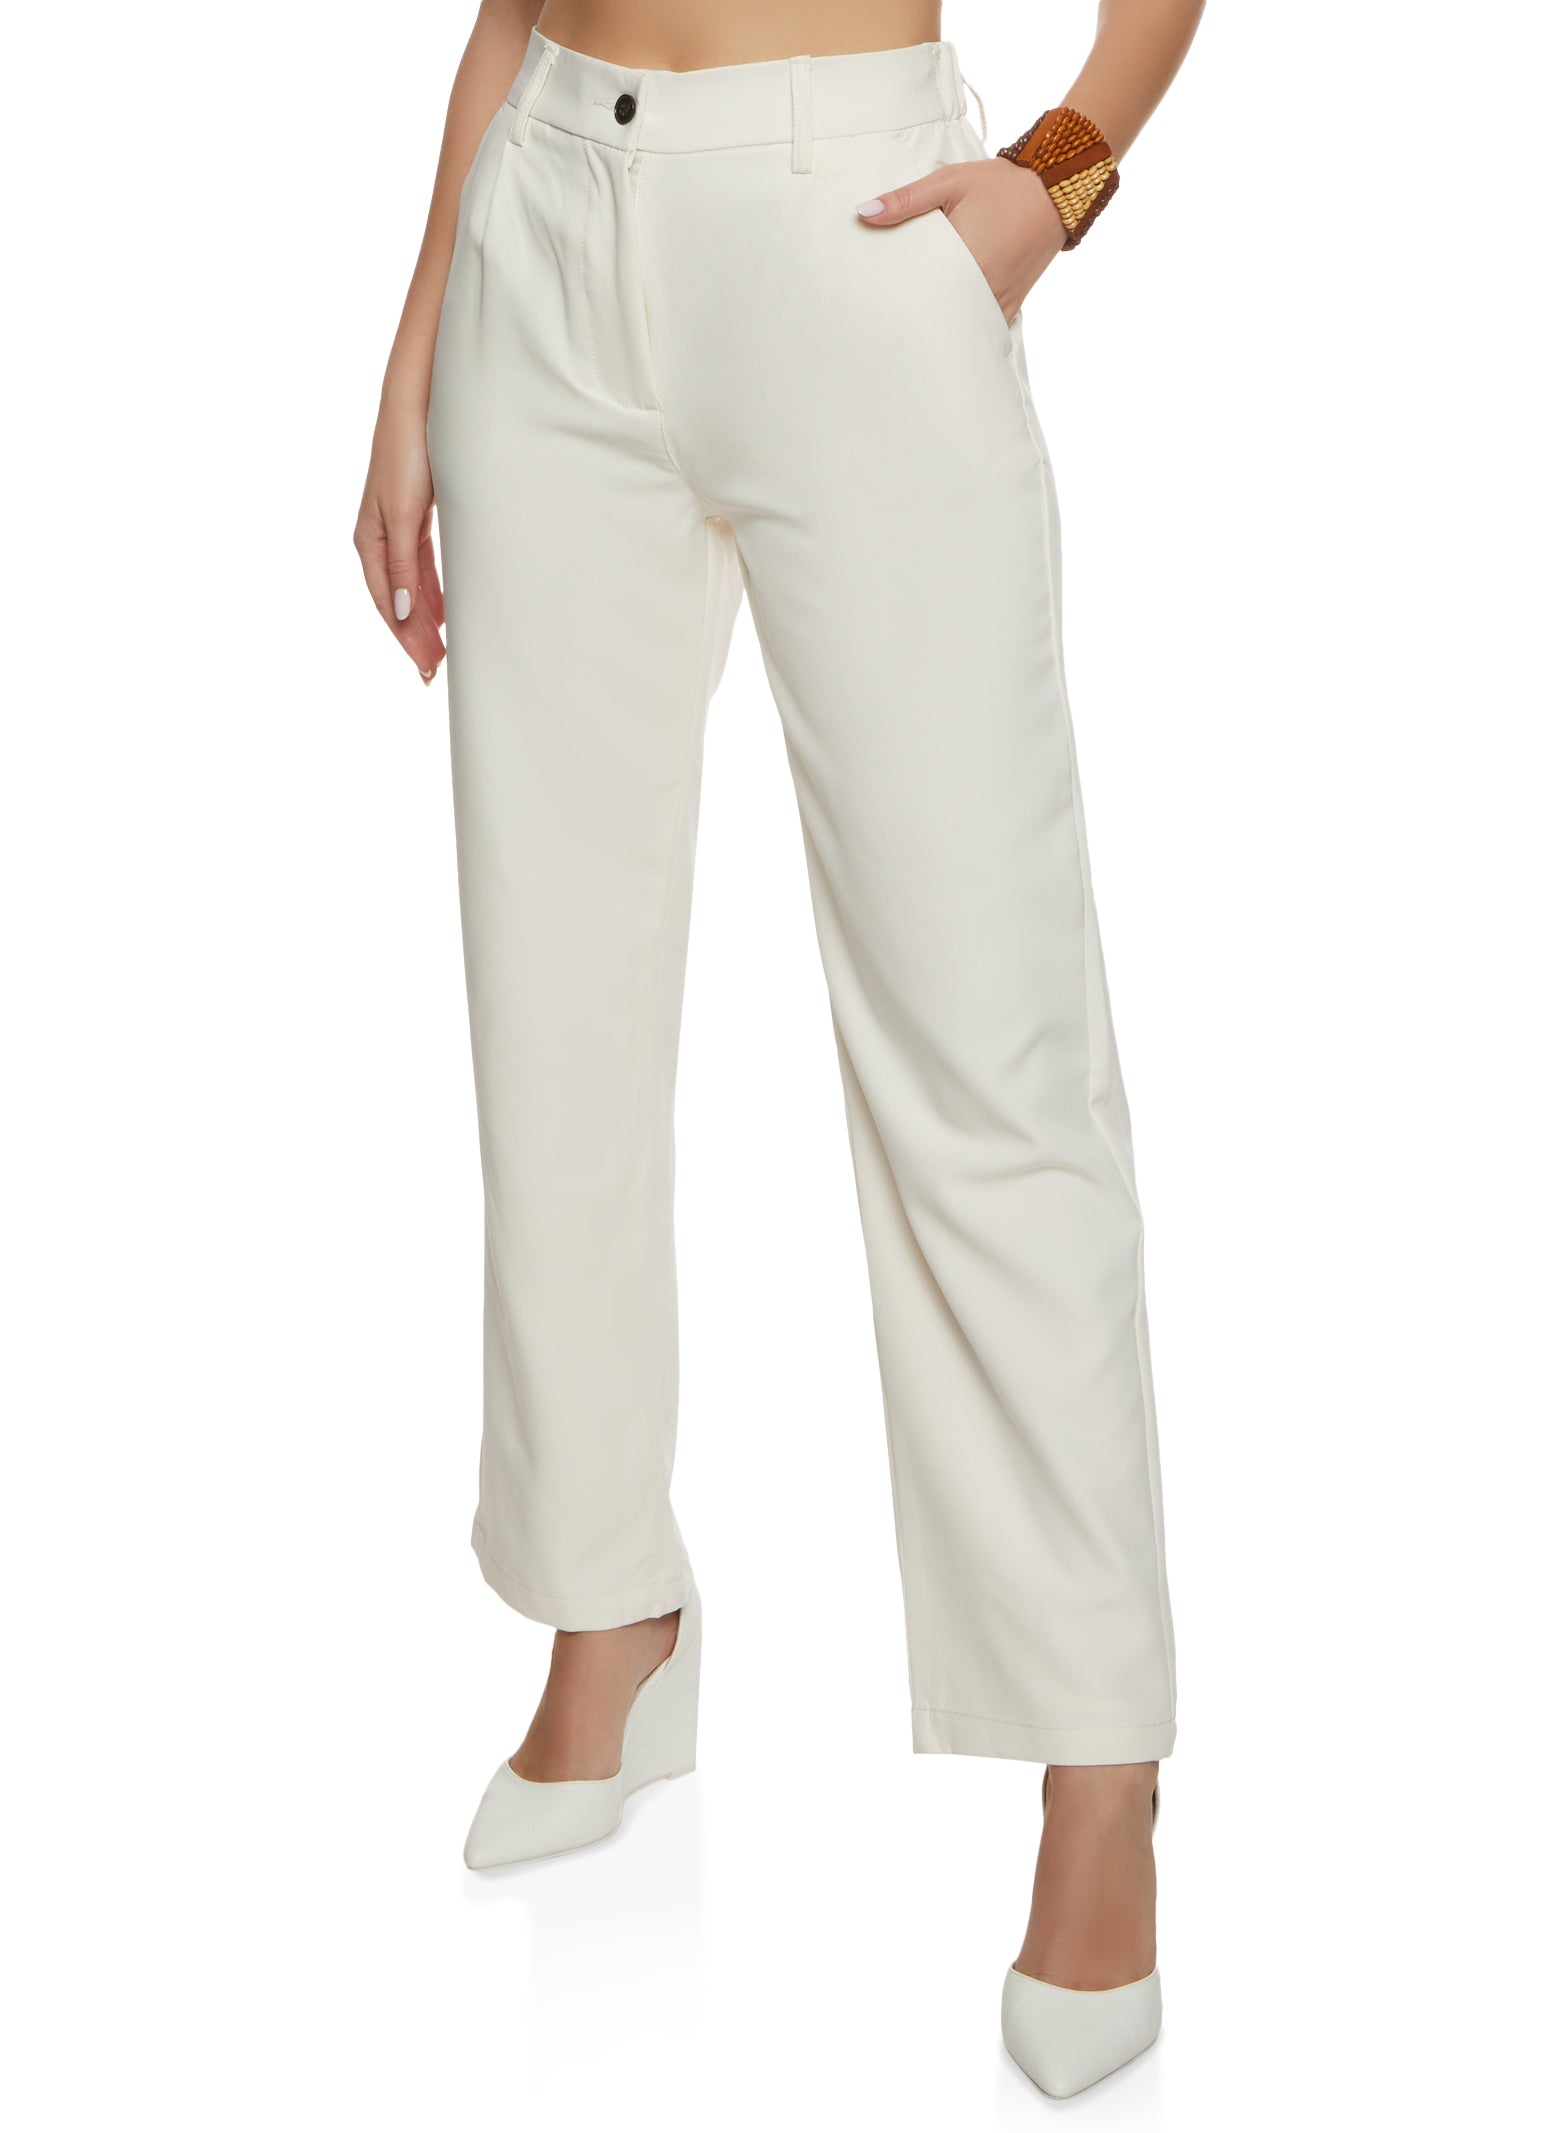 Womens Dress Pants, Everyday Low Prices